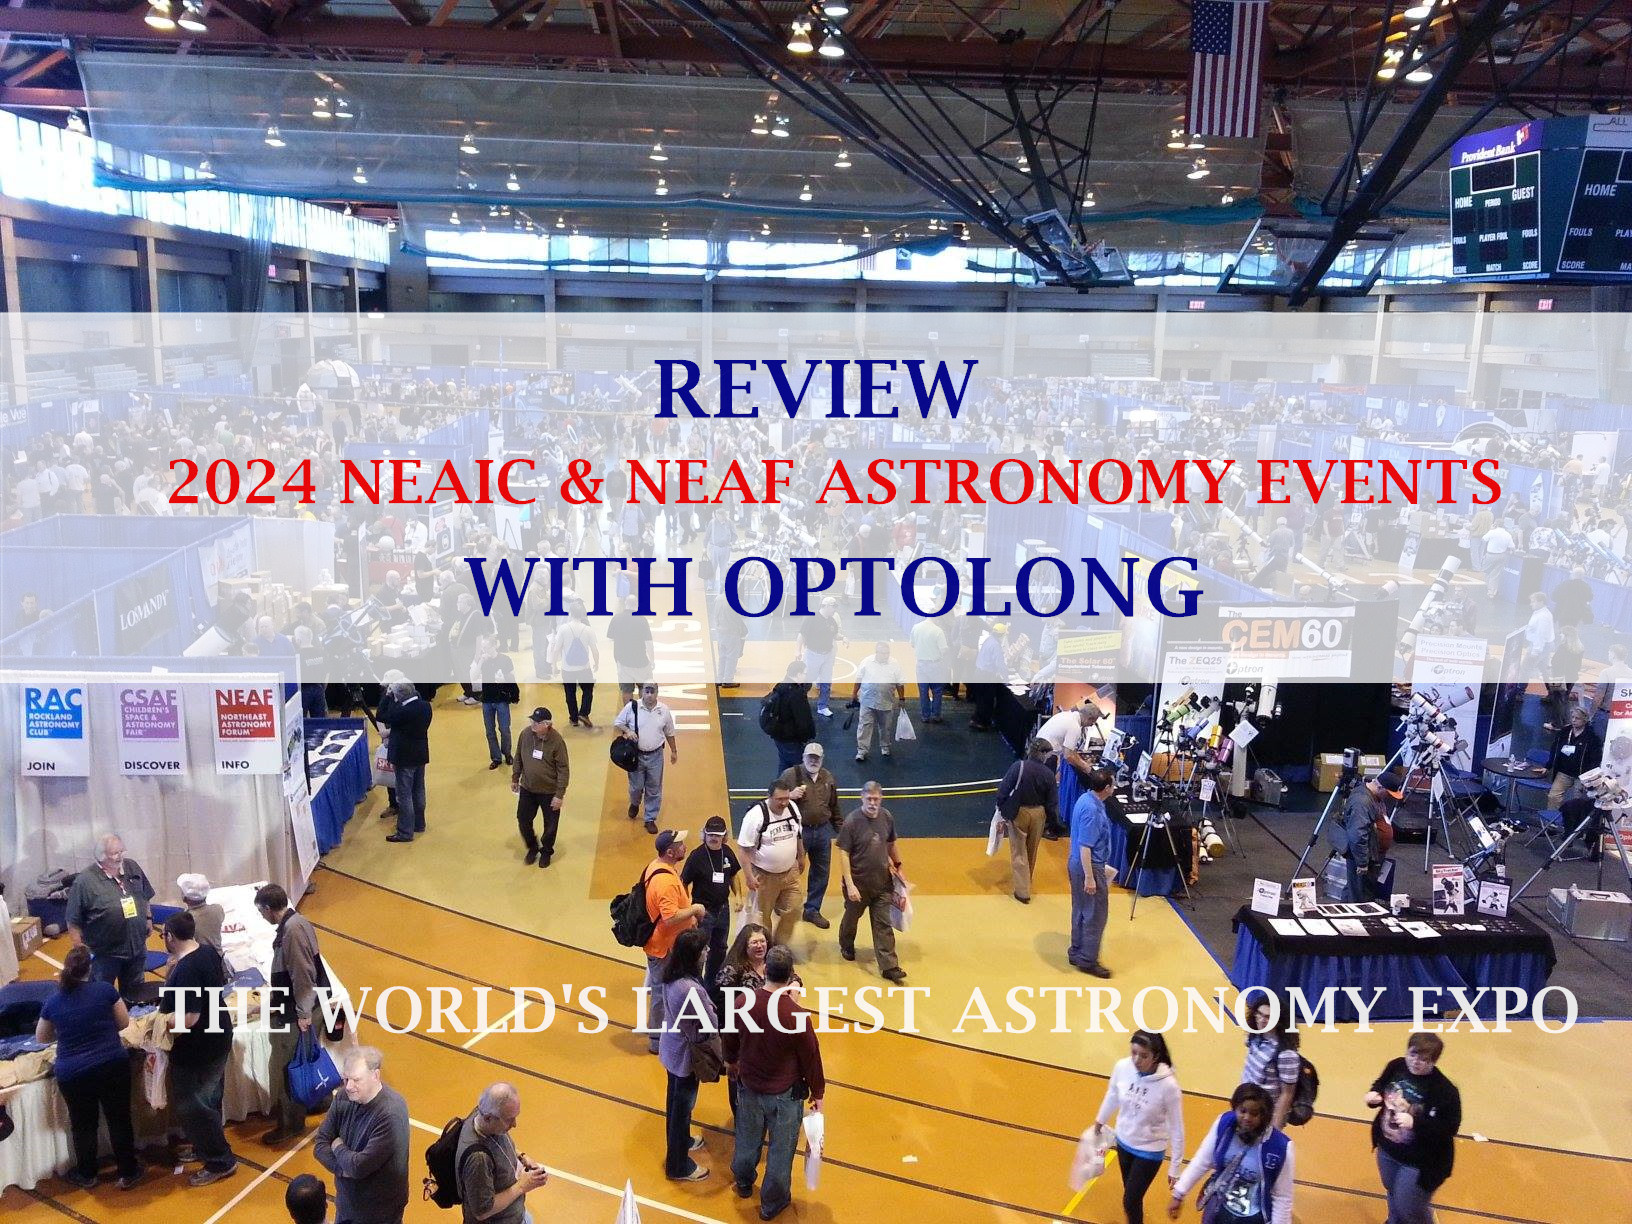 Review of Optolong at NEAIC and NEAF Astronomy Shows in New York, US